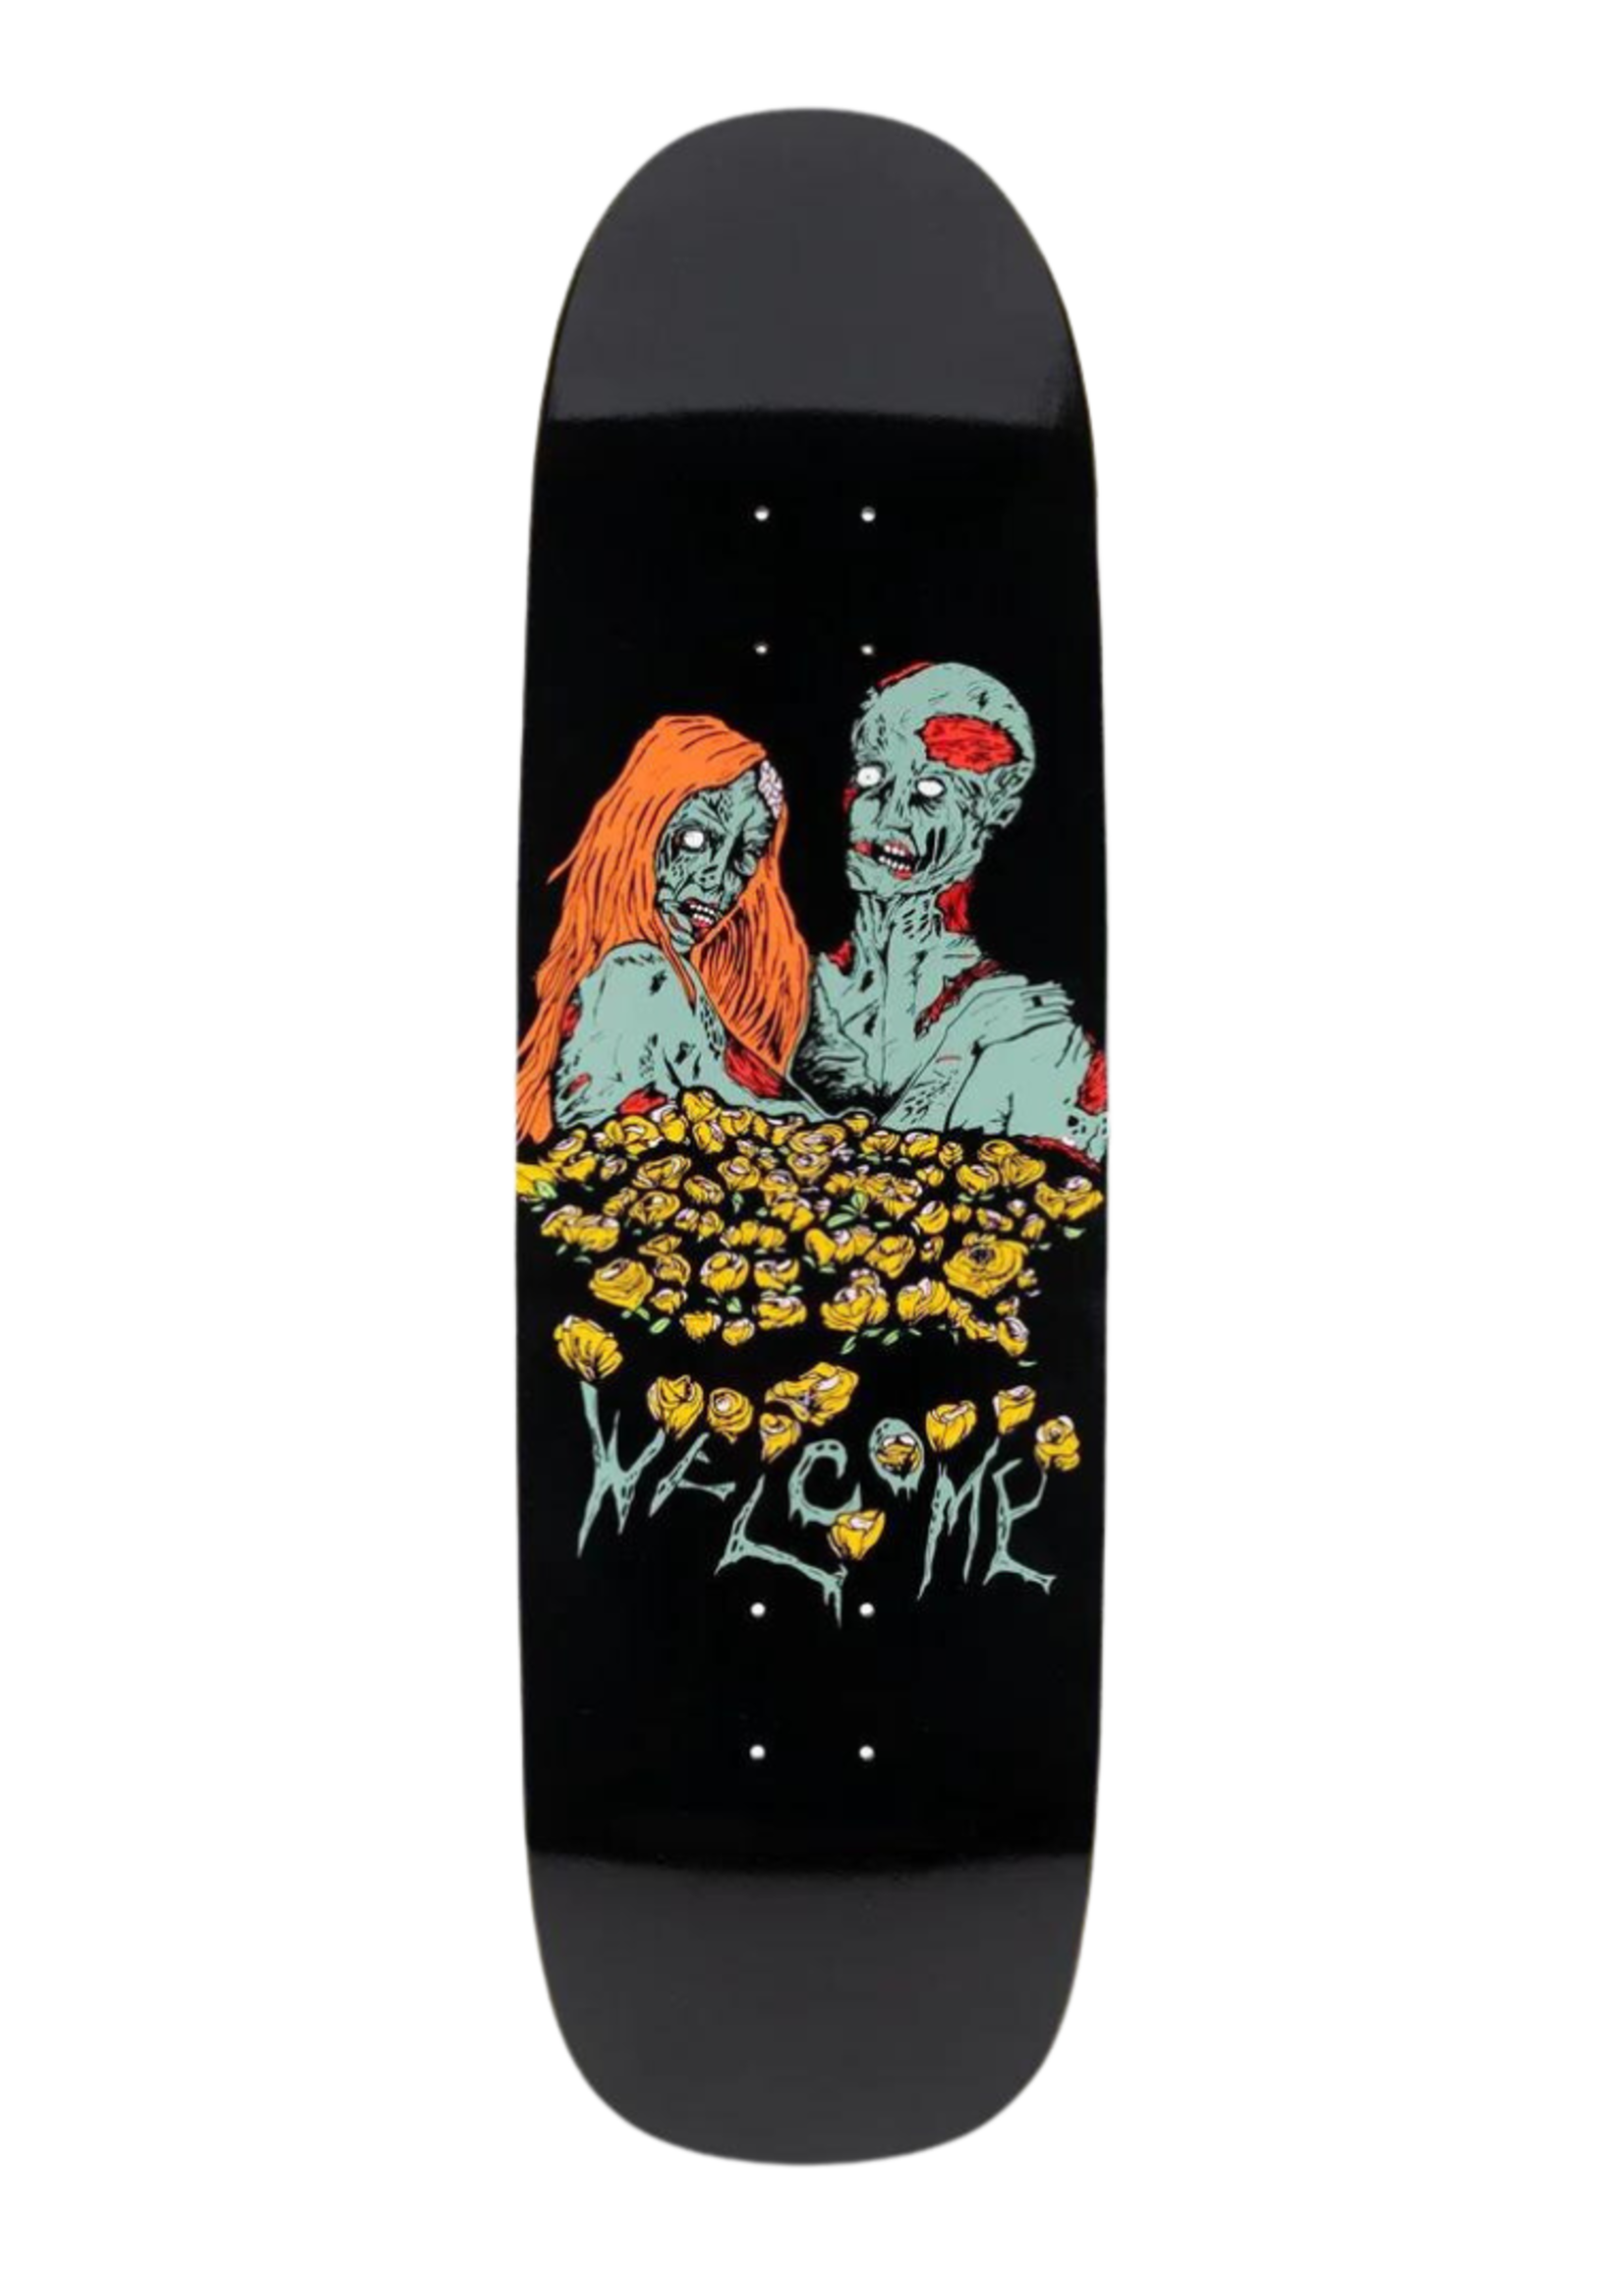 WELCOME ZOMBIE LOVE ON BOLINE 9.25" DECK